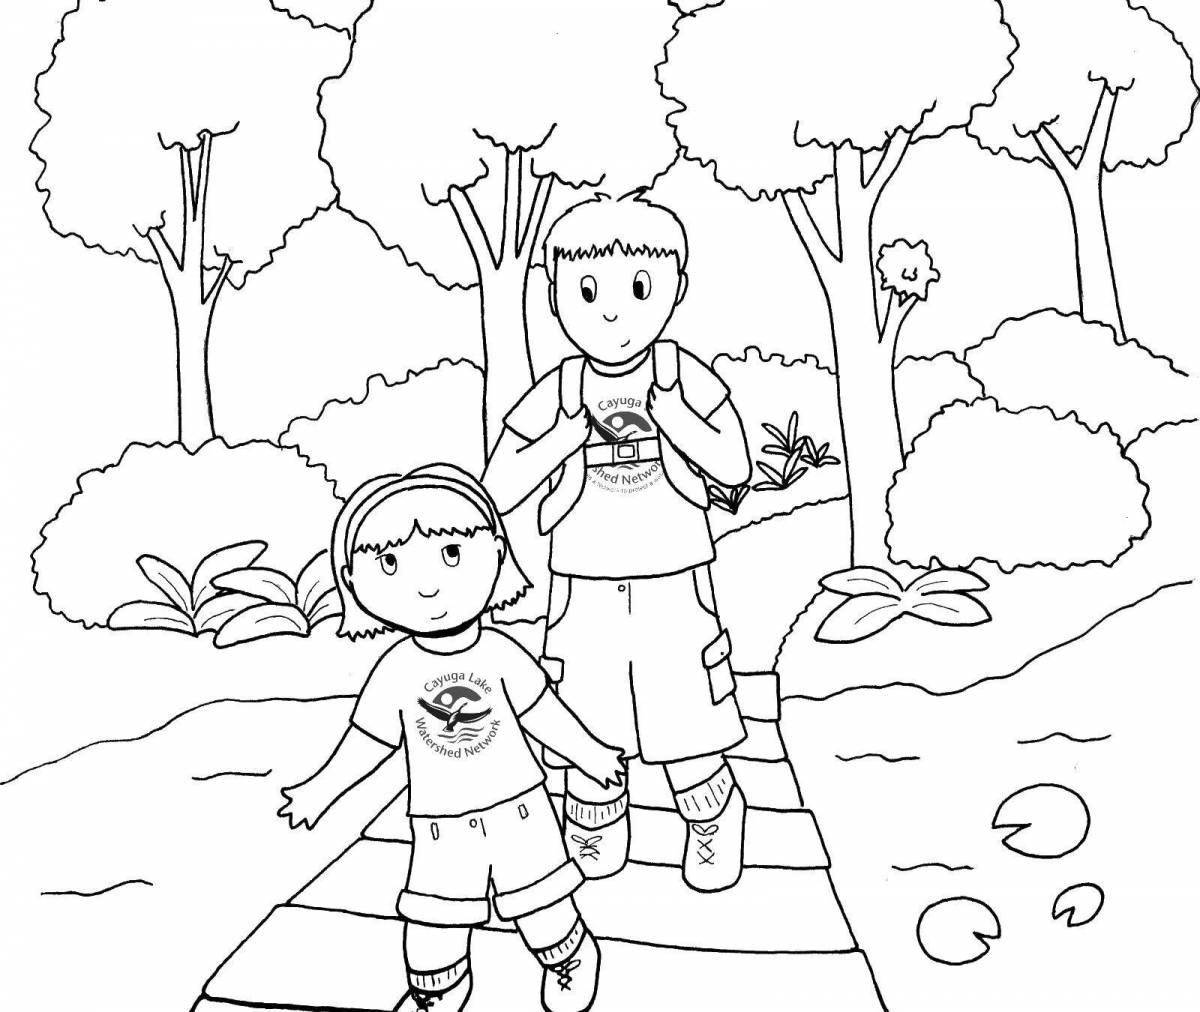 Bright tabiqat coloring page